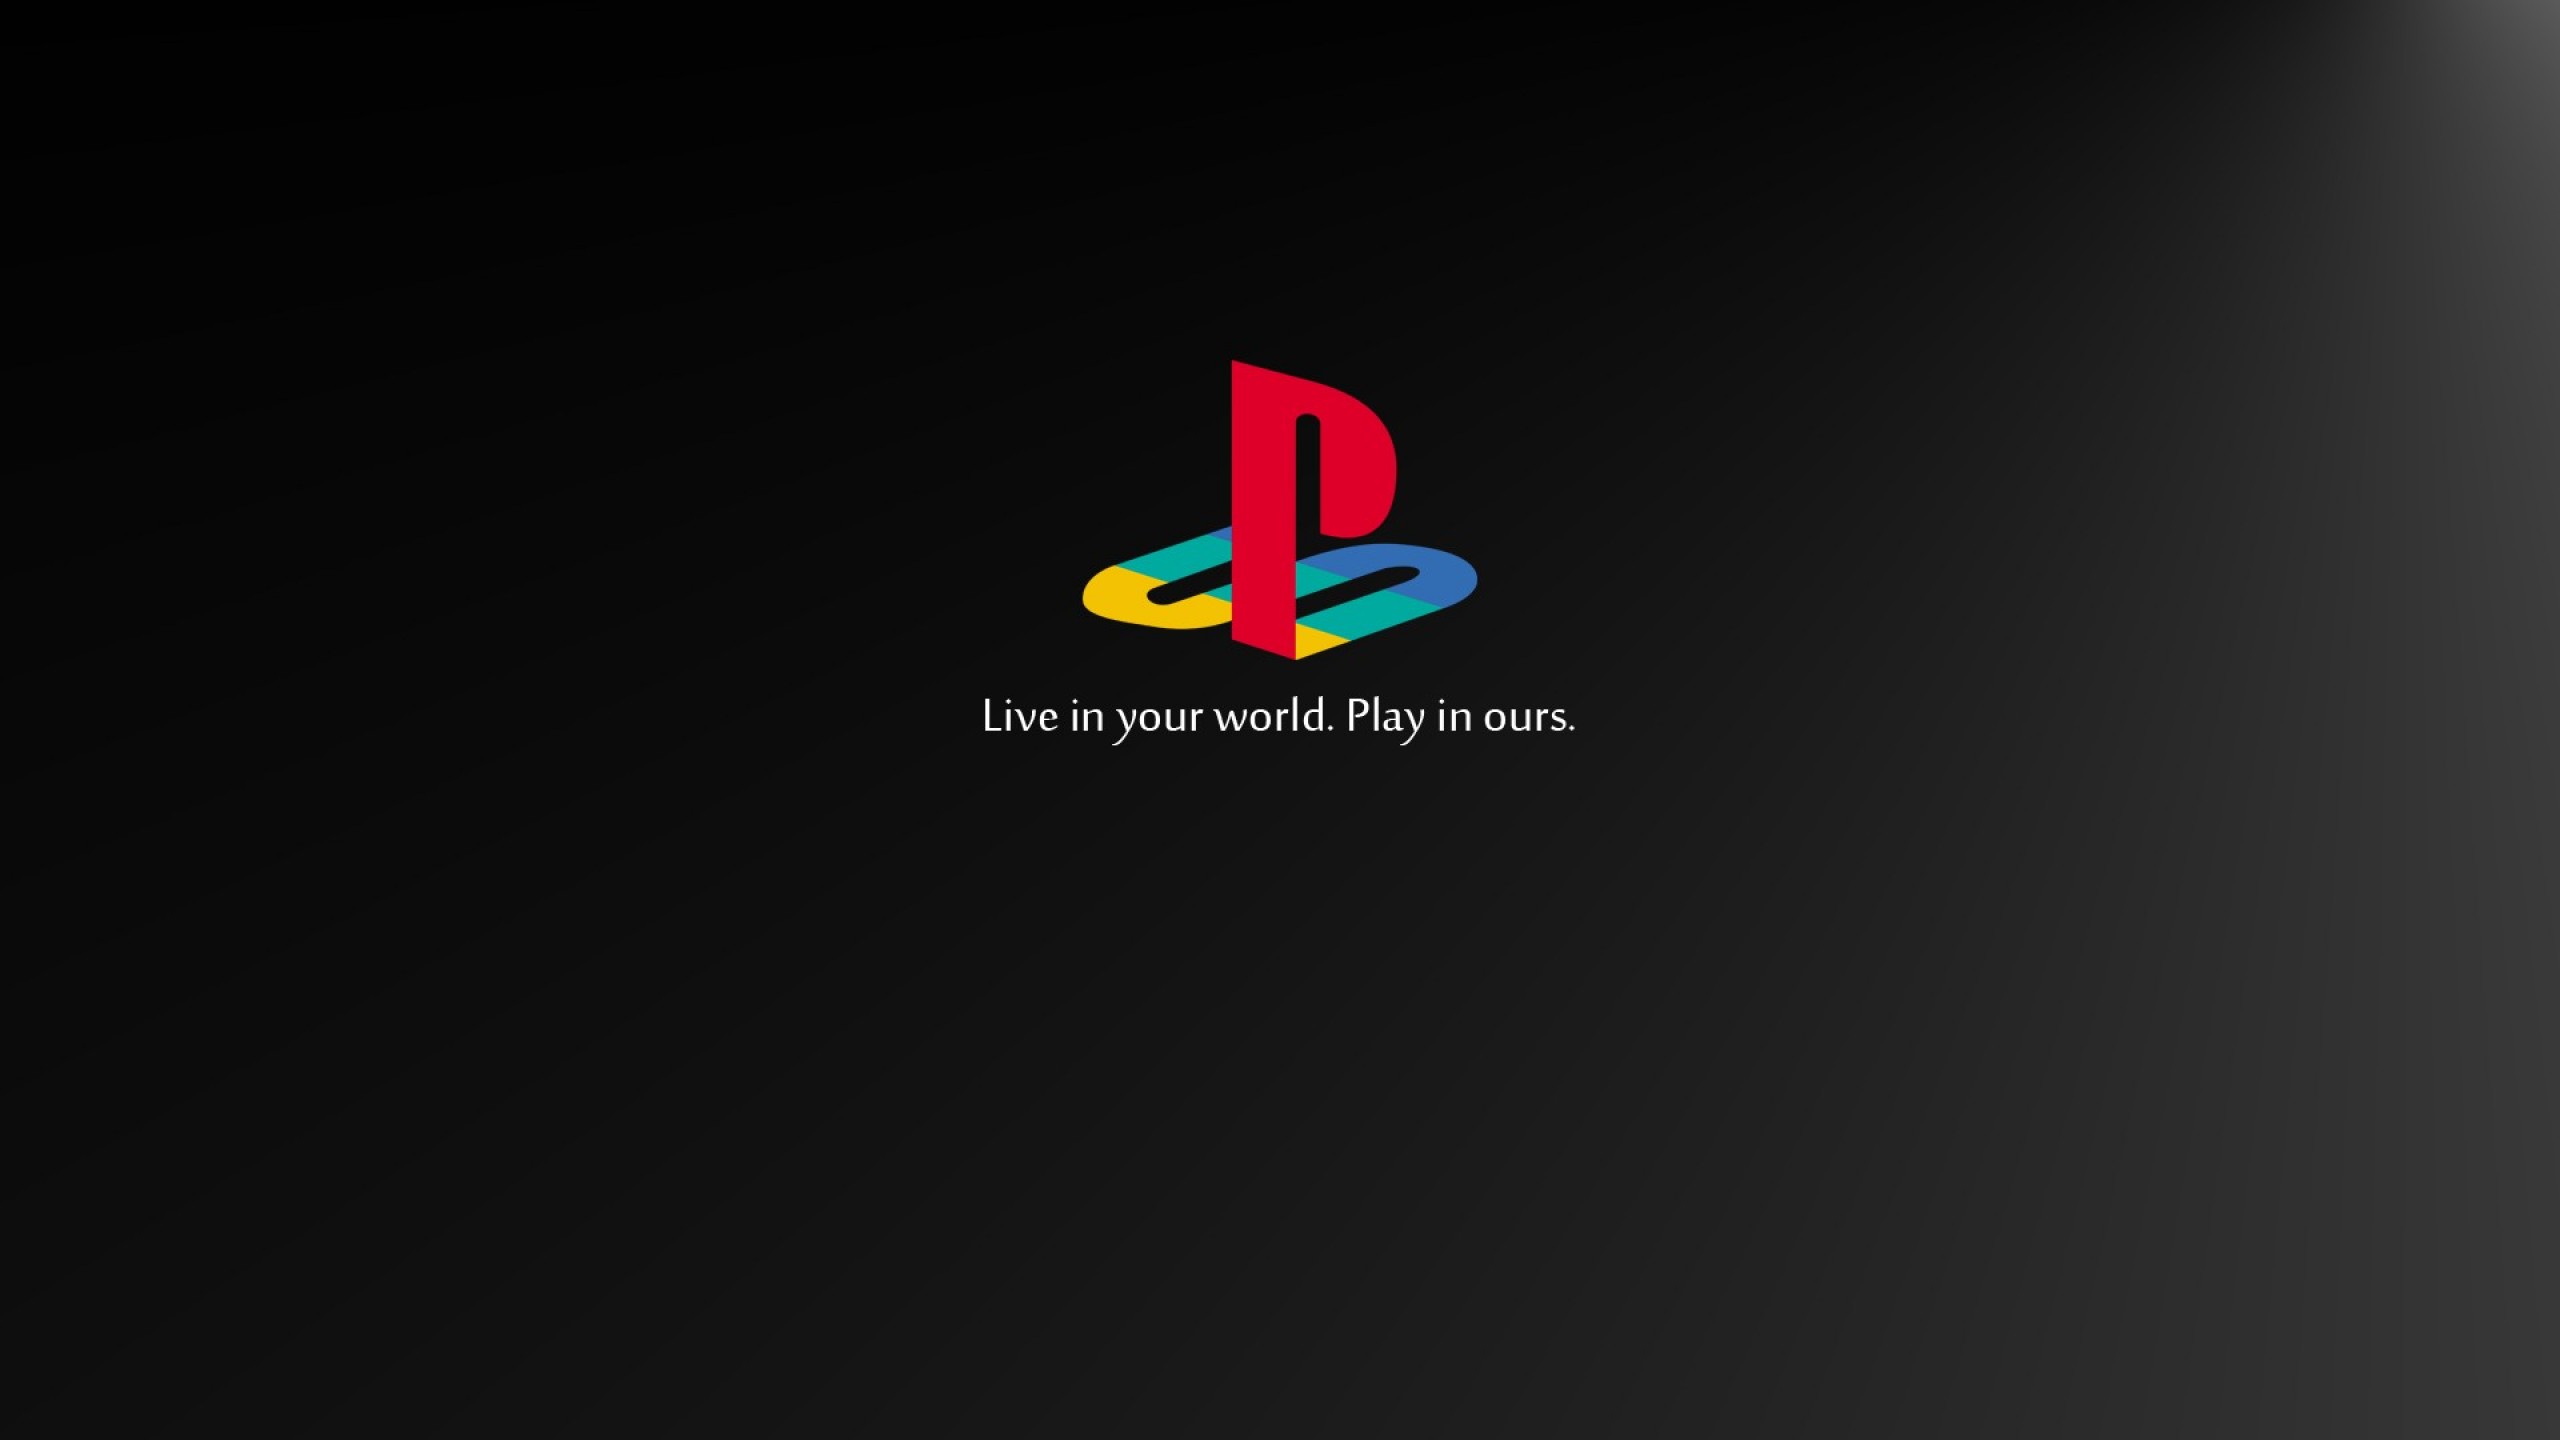 Playstation Logo Hd Wallpaper For Desktop And Mobiles Youtube